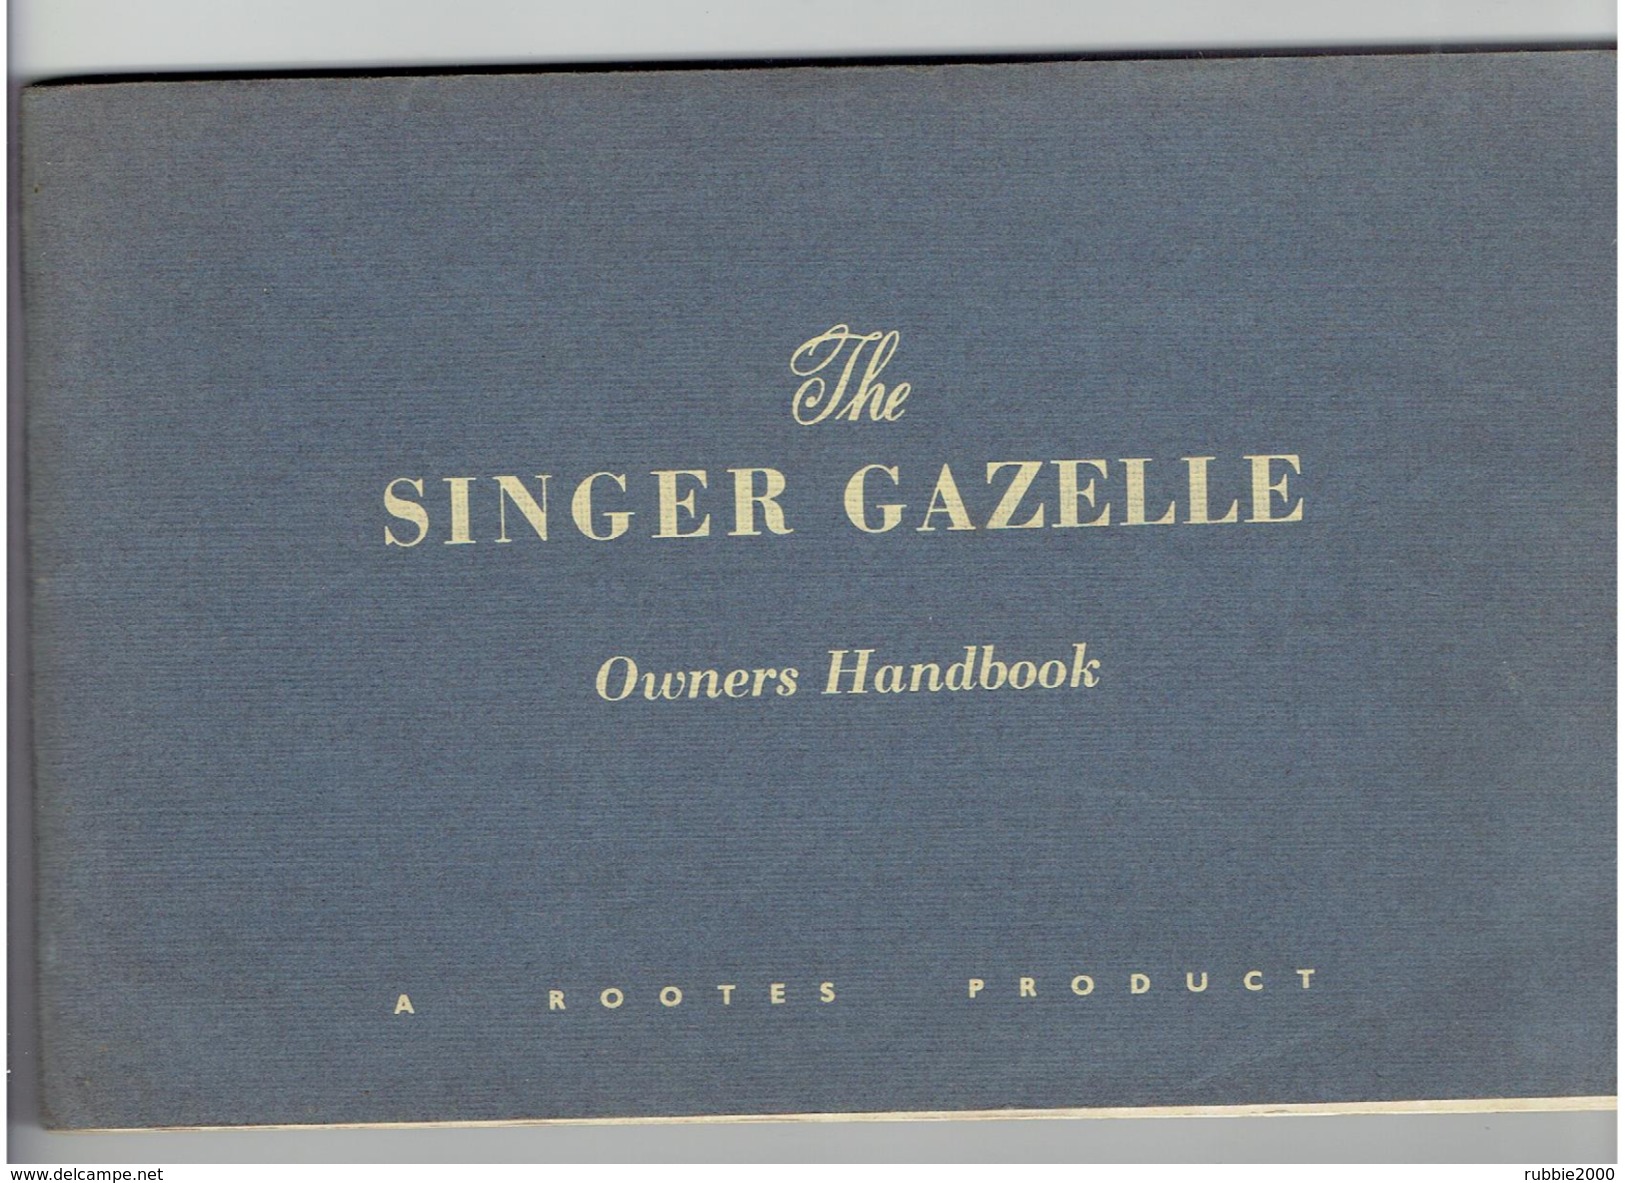 THE SINGER GAZELLE OWNERS HANDBOOK ISSUED 1958 SINGER MOTORS LIMITED COVENTRY ENGLAND A ROOTES PRODUCT - Verkehr